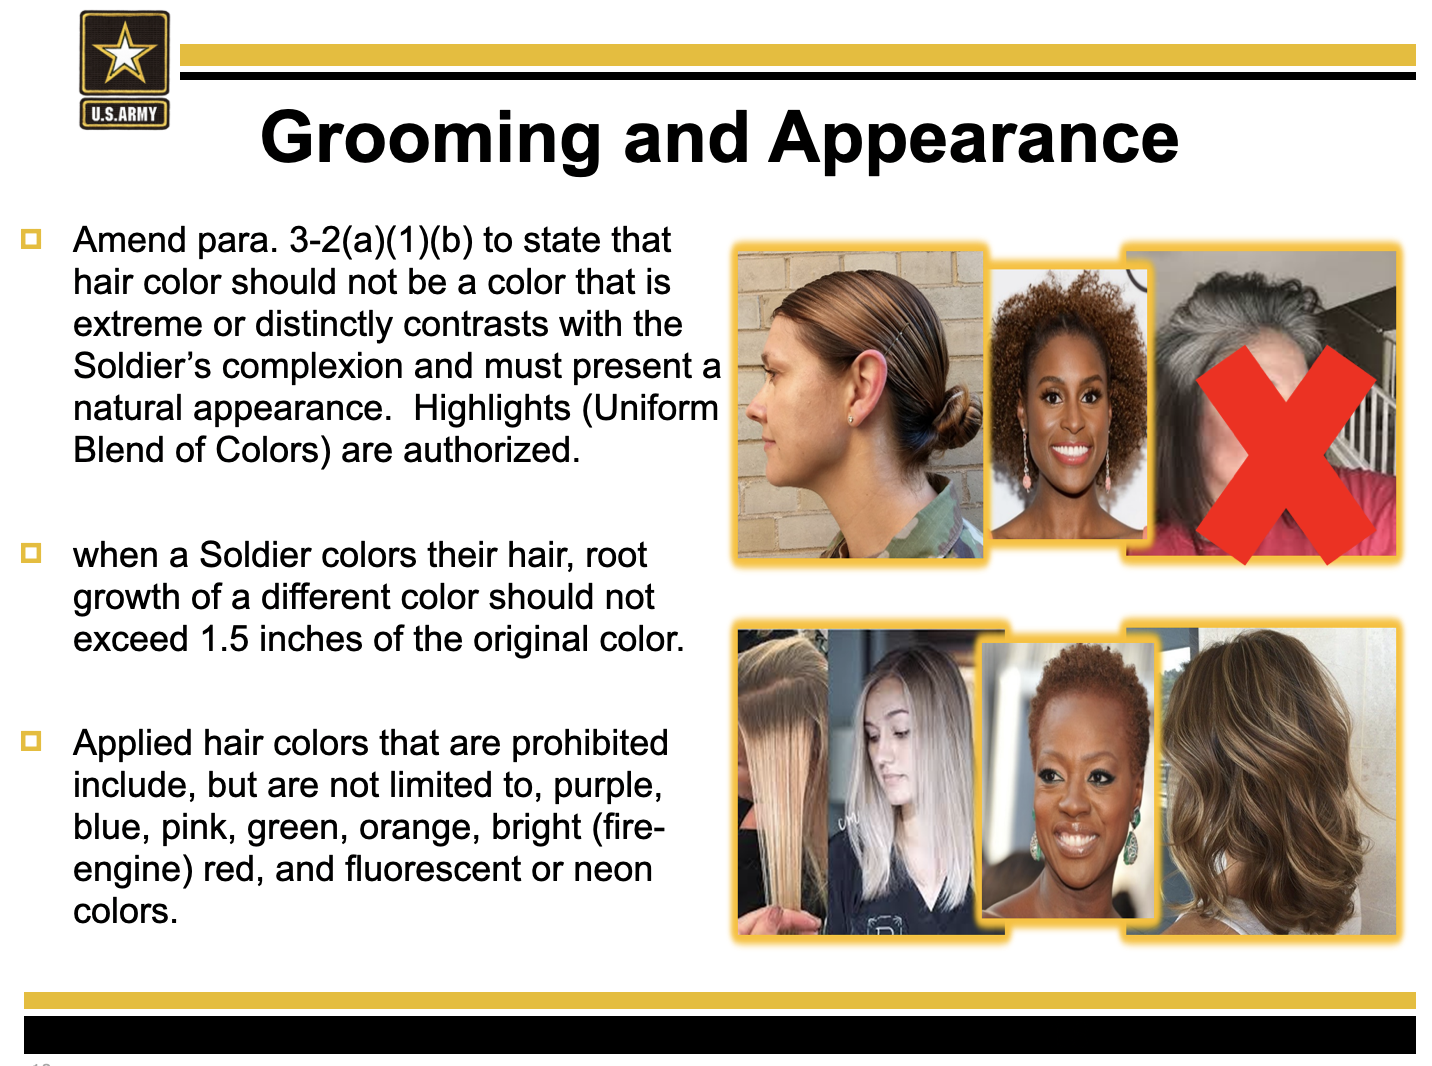 Air Force Grooming Standards for Women: Hair, Makeup, and Nail Regulations - wide 3